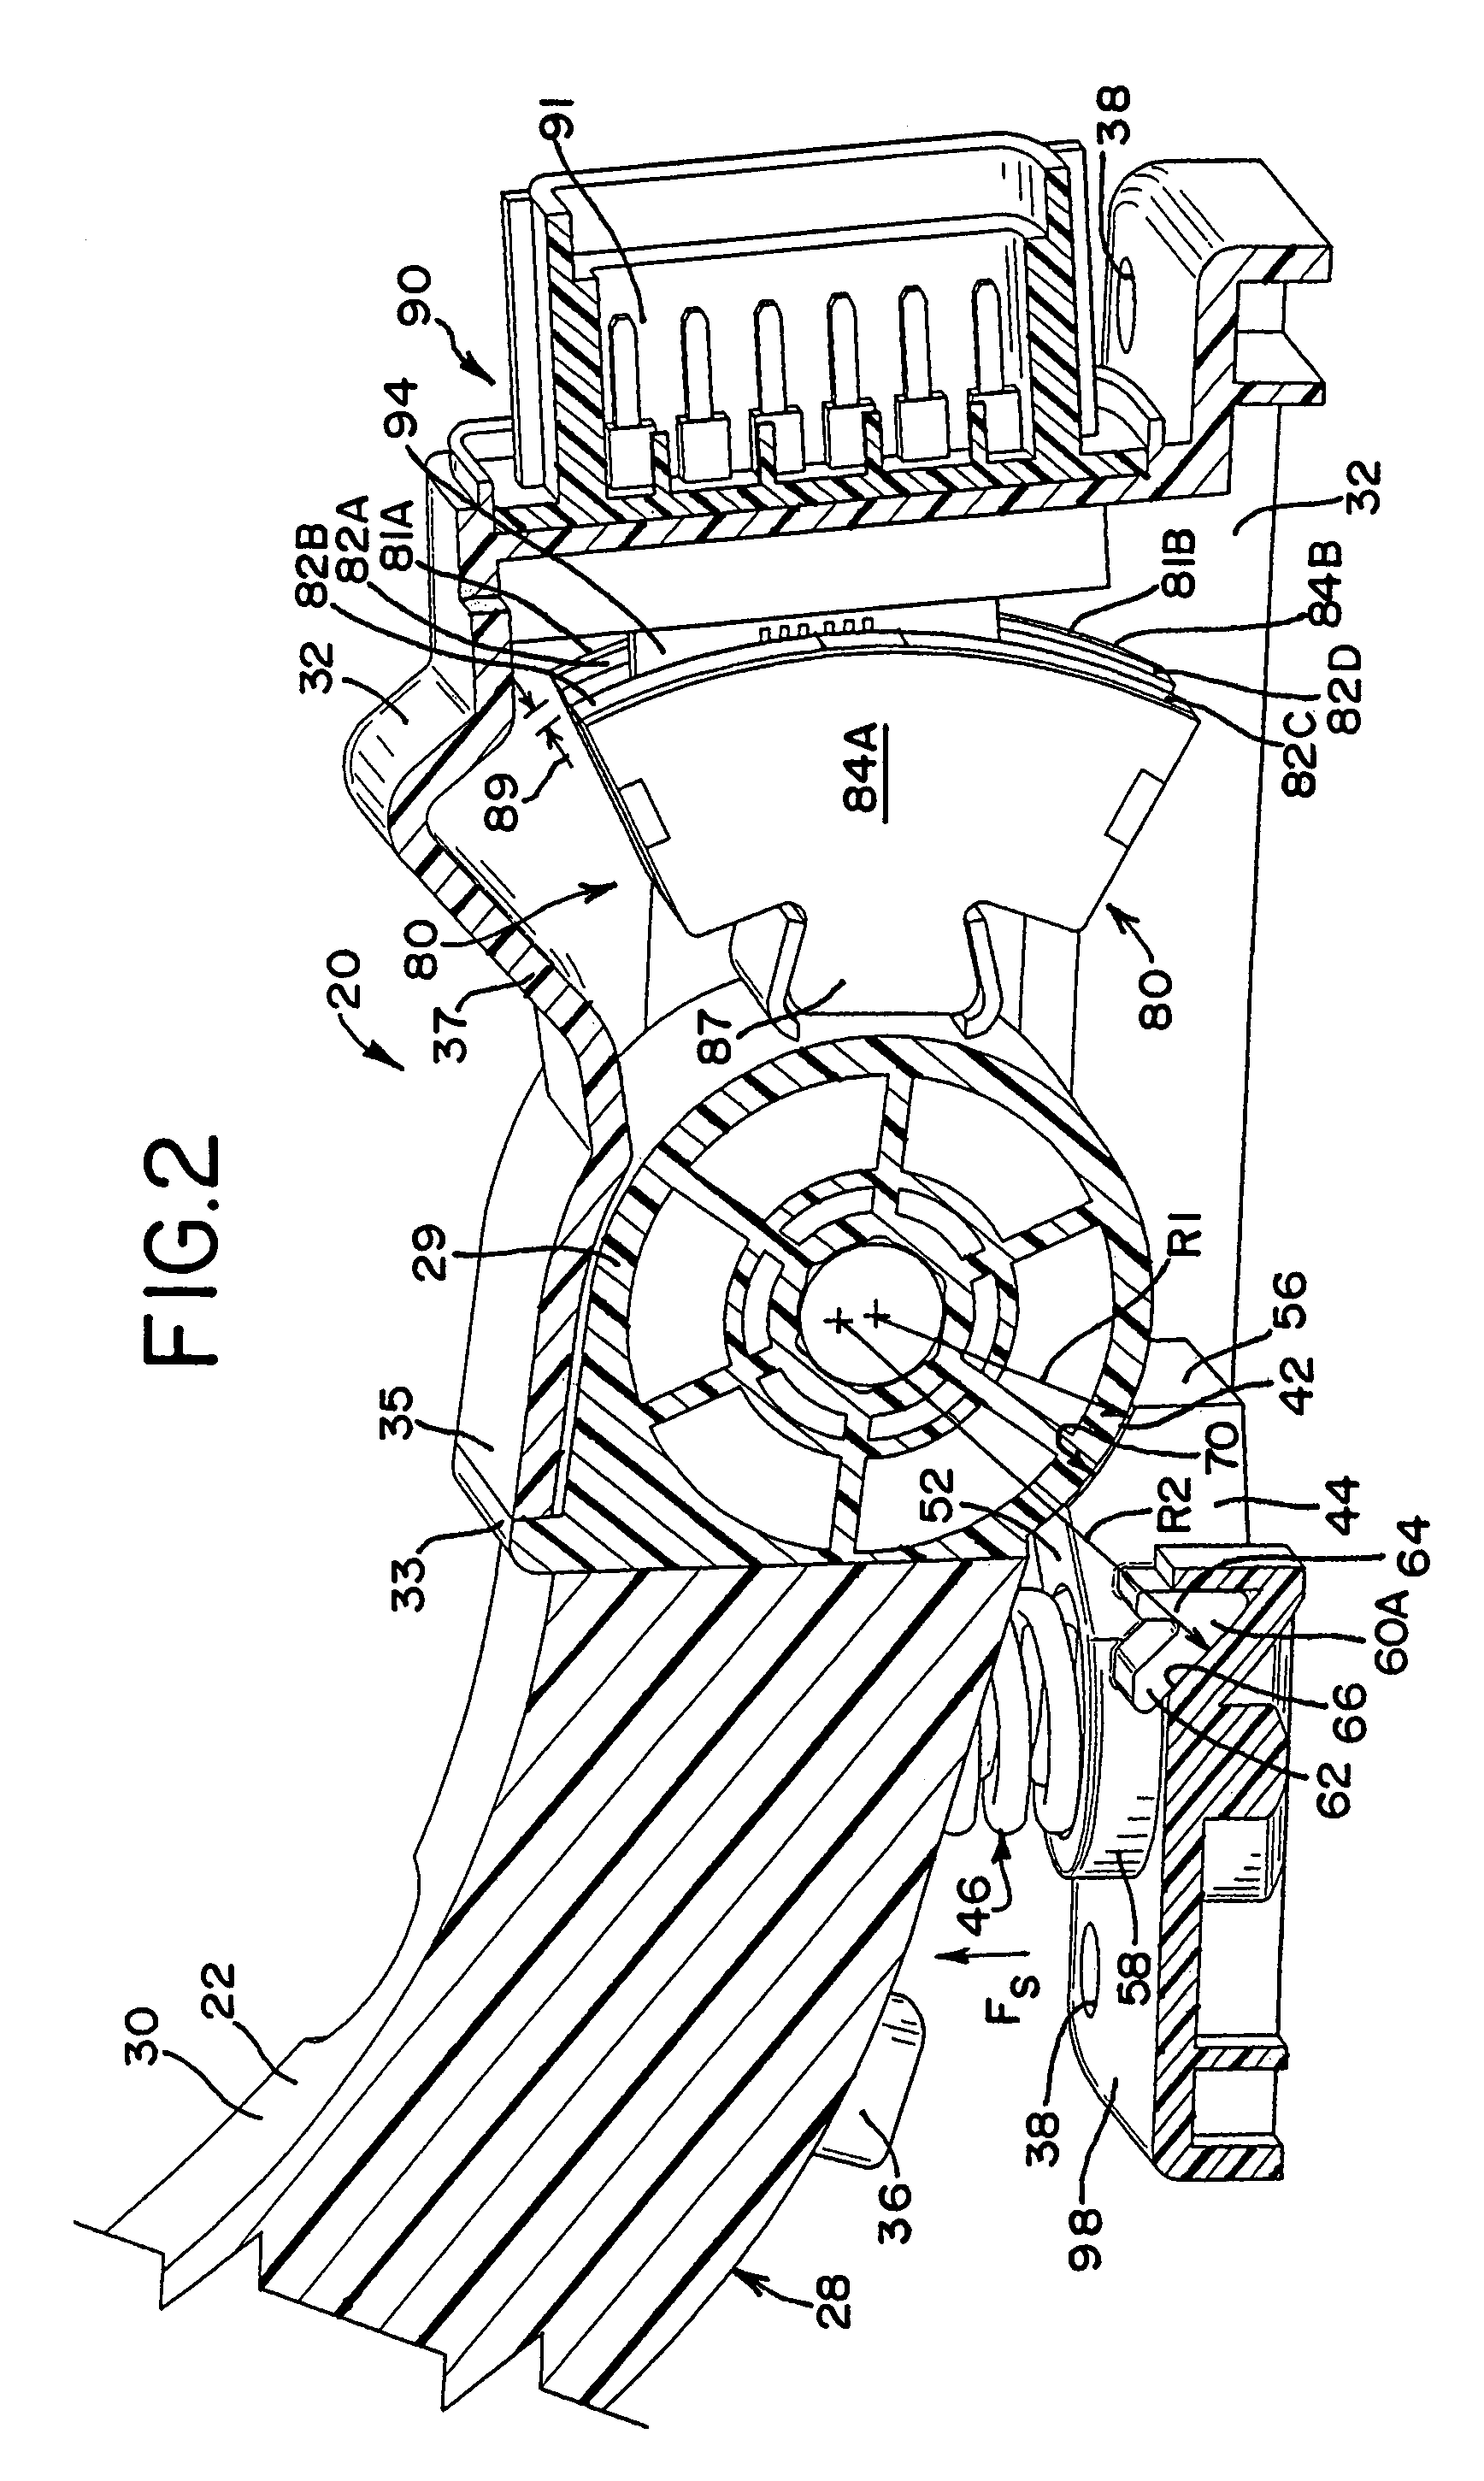 Accelerator pedal for motorized vehicle